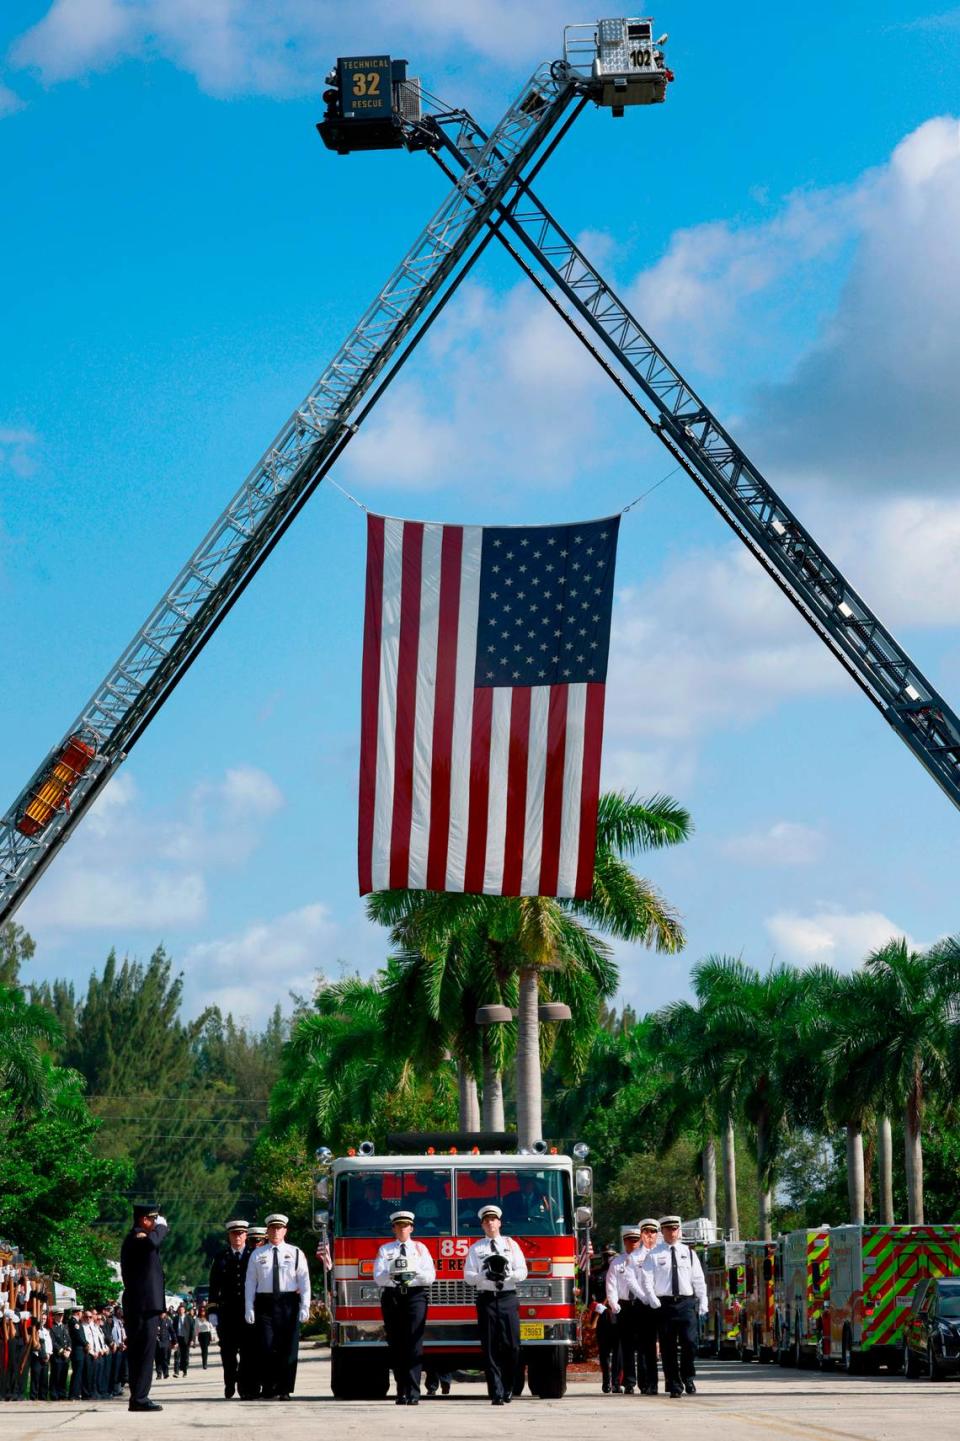 The funeral procession for Broward Sheriff Fire Rescue Battalion Chief Terryson Jackson arrives at the Faith Center in Sunrise on Friday, September 8, 2023. Jackson died in a helicopter crash on Monday, Aug. 28, when he and two BSFR colleagues were responding to an emergency call. (Mike Stocker/South Florida Sun Sentinel)